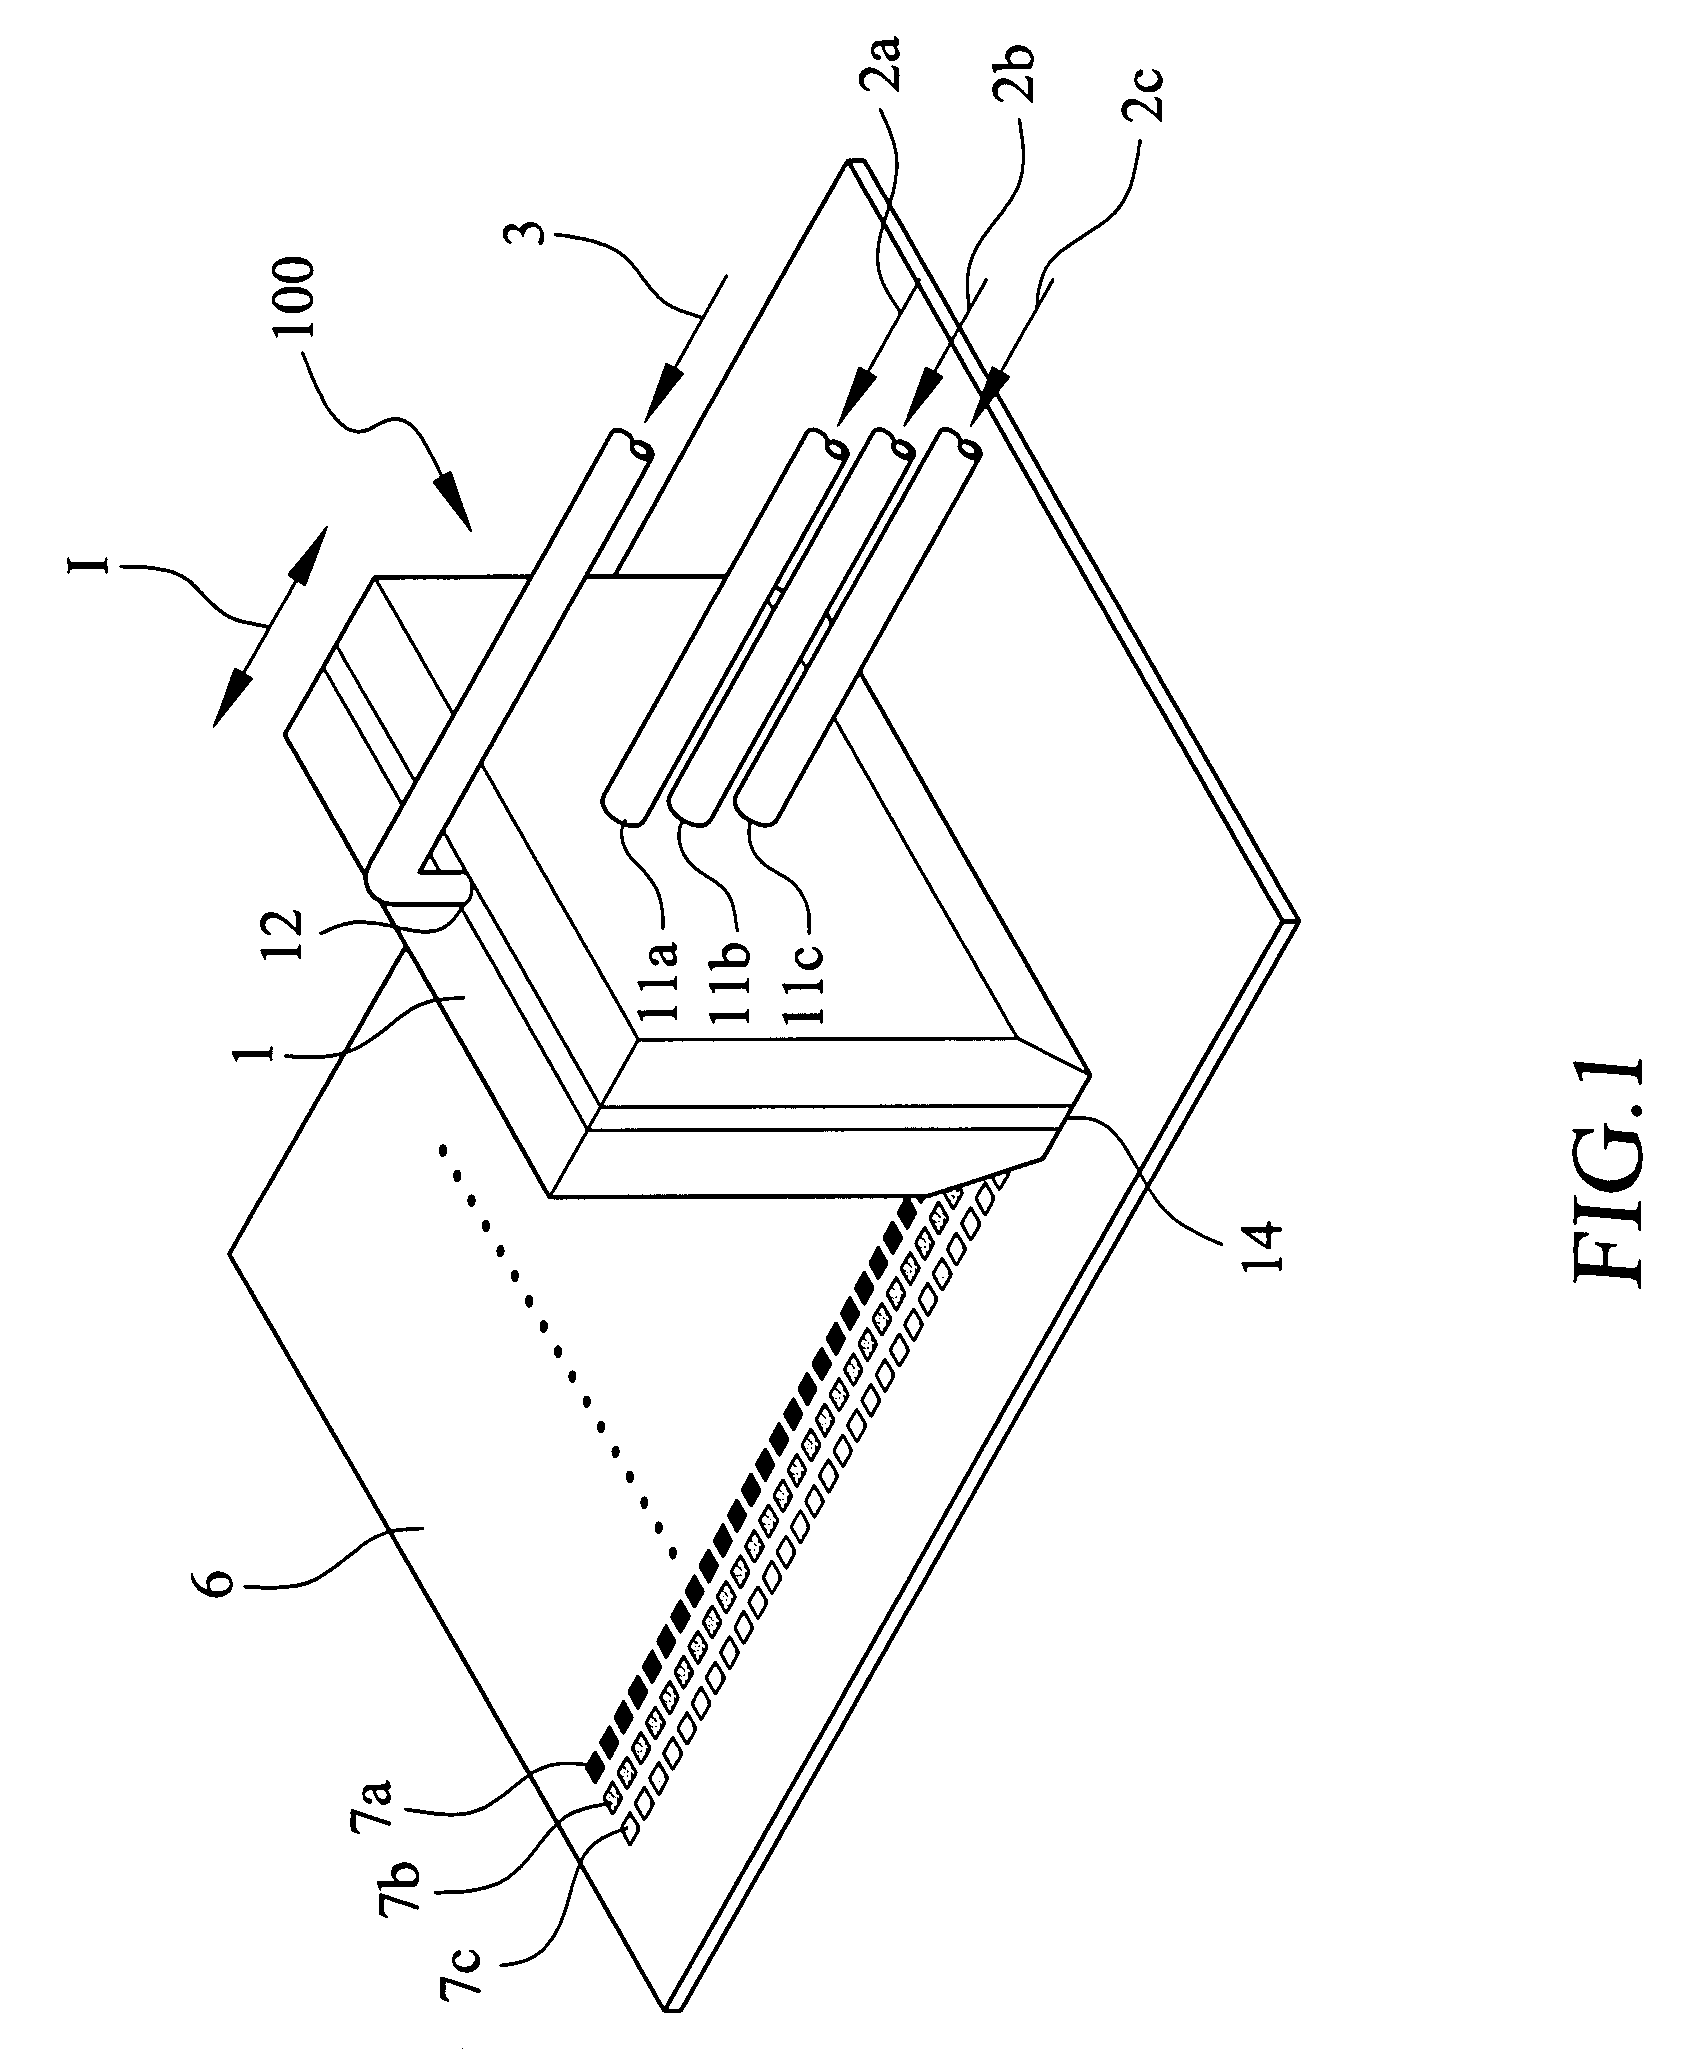 Micro patch coating device and method